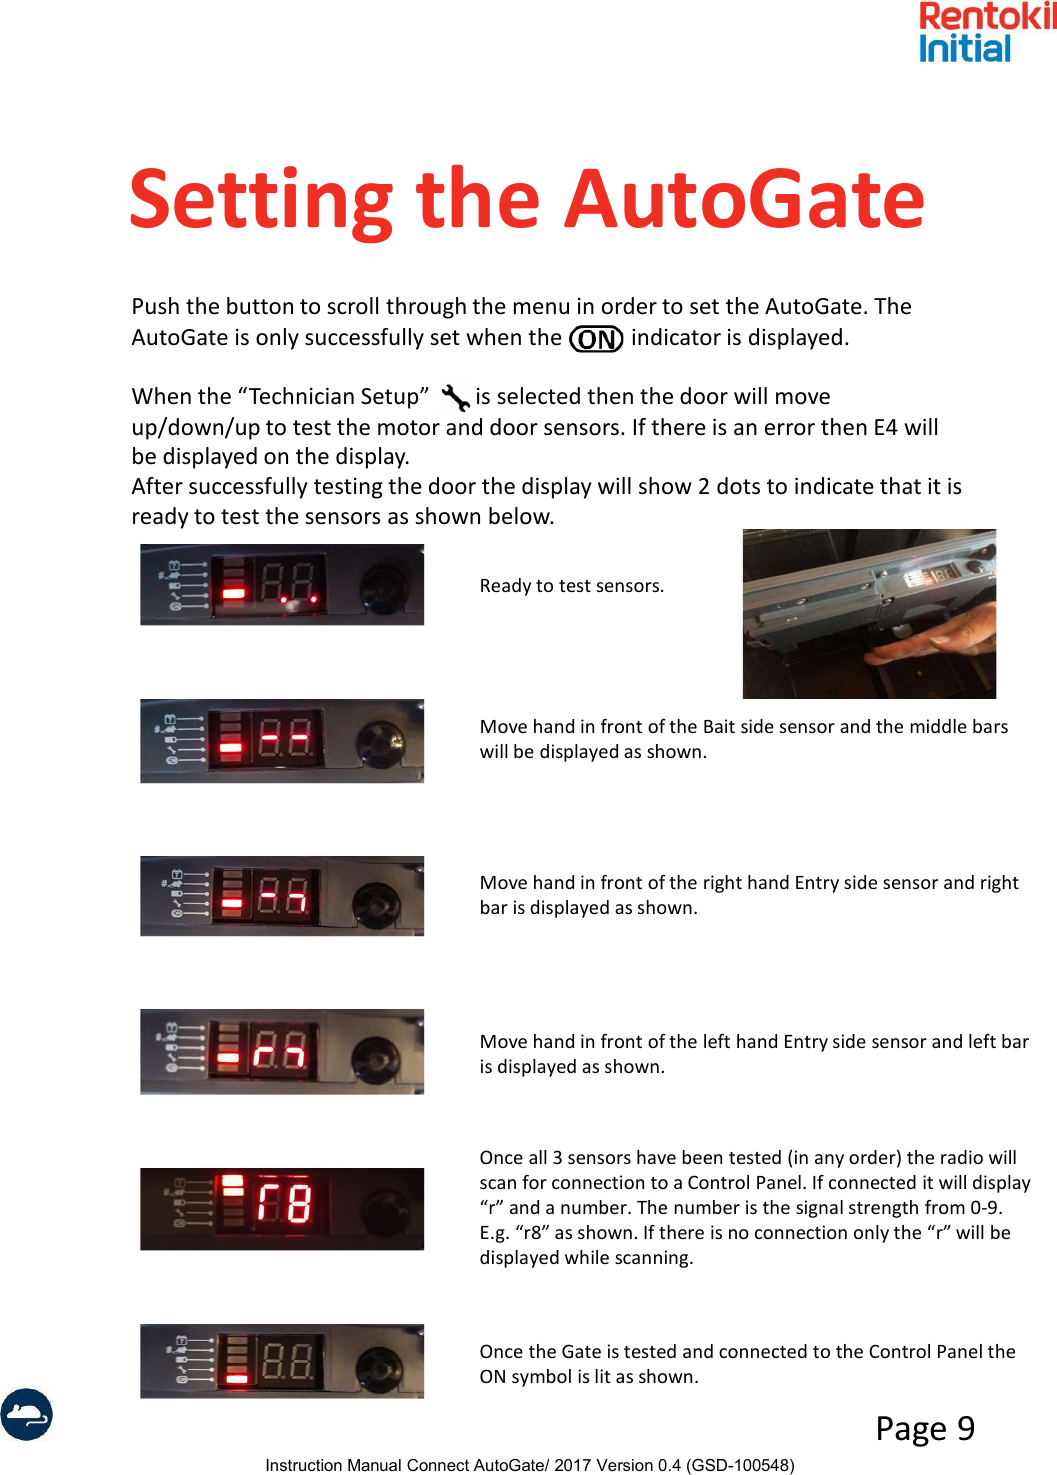 Instruction Manual Connect AutoGate/ 2017 Version 0.4 (GSD-100548)Page 9Setting the AutoGatePush the button to scroll through the menu in order to set the AutoGate. The AutoGate is only successfully set when the            indicator is displayed.When the “Technician Setup”        is selected then the door will move up/down/up to test the motor and door sensors. If there is an error then E4 will be displayed on the display.After successfully testing the door the display will show 2 dots to indicate that it is ready to test the sensors as shown below.Ready to test sensors.Move hand in front of the Bait side sensor and the middle bars will be displayed as shown.Move hand in front of the right hand Entry side sensor and right bar is displayed as shown.Move hand in front of the left hand Entry side sensor and left bar is displayed as shown.Once all 3 sensors have been tested (in any order) the radio will scan for connection to a Control Panel. If connected it will display “r” and a number. The number is the signal strength from 0-9. E.g. “r8” as shown. If there is no connection only the “r” will be displayed while scanning.Once the Gate is tested and connected to the Control Panel the ON symbol is lit as shown.